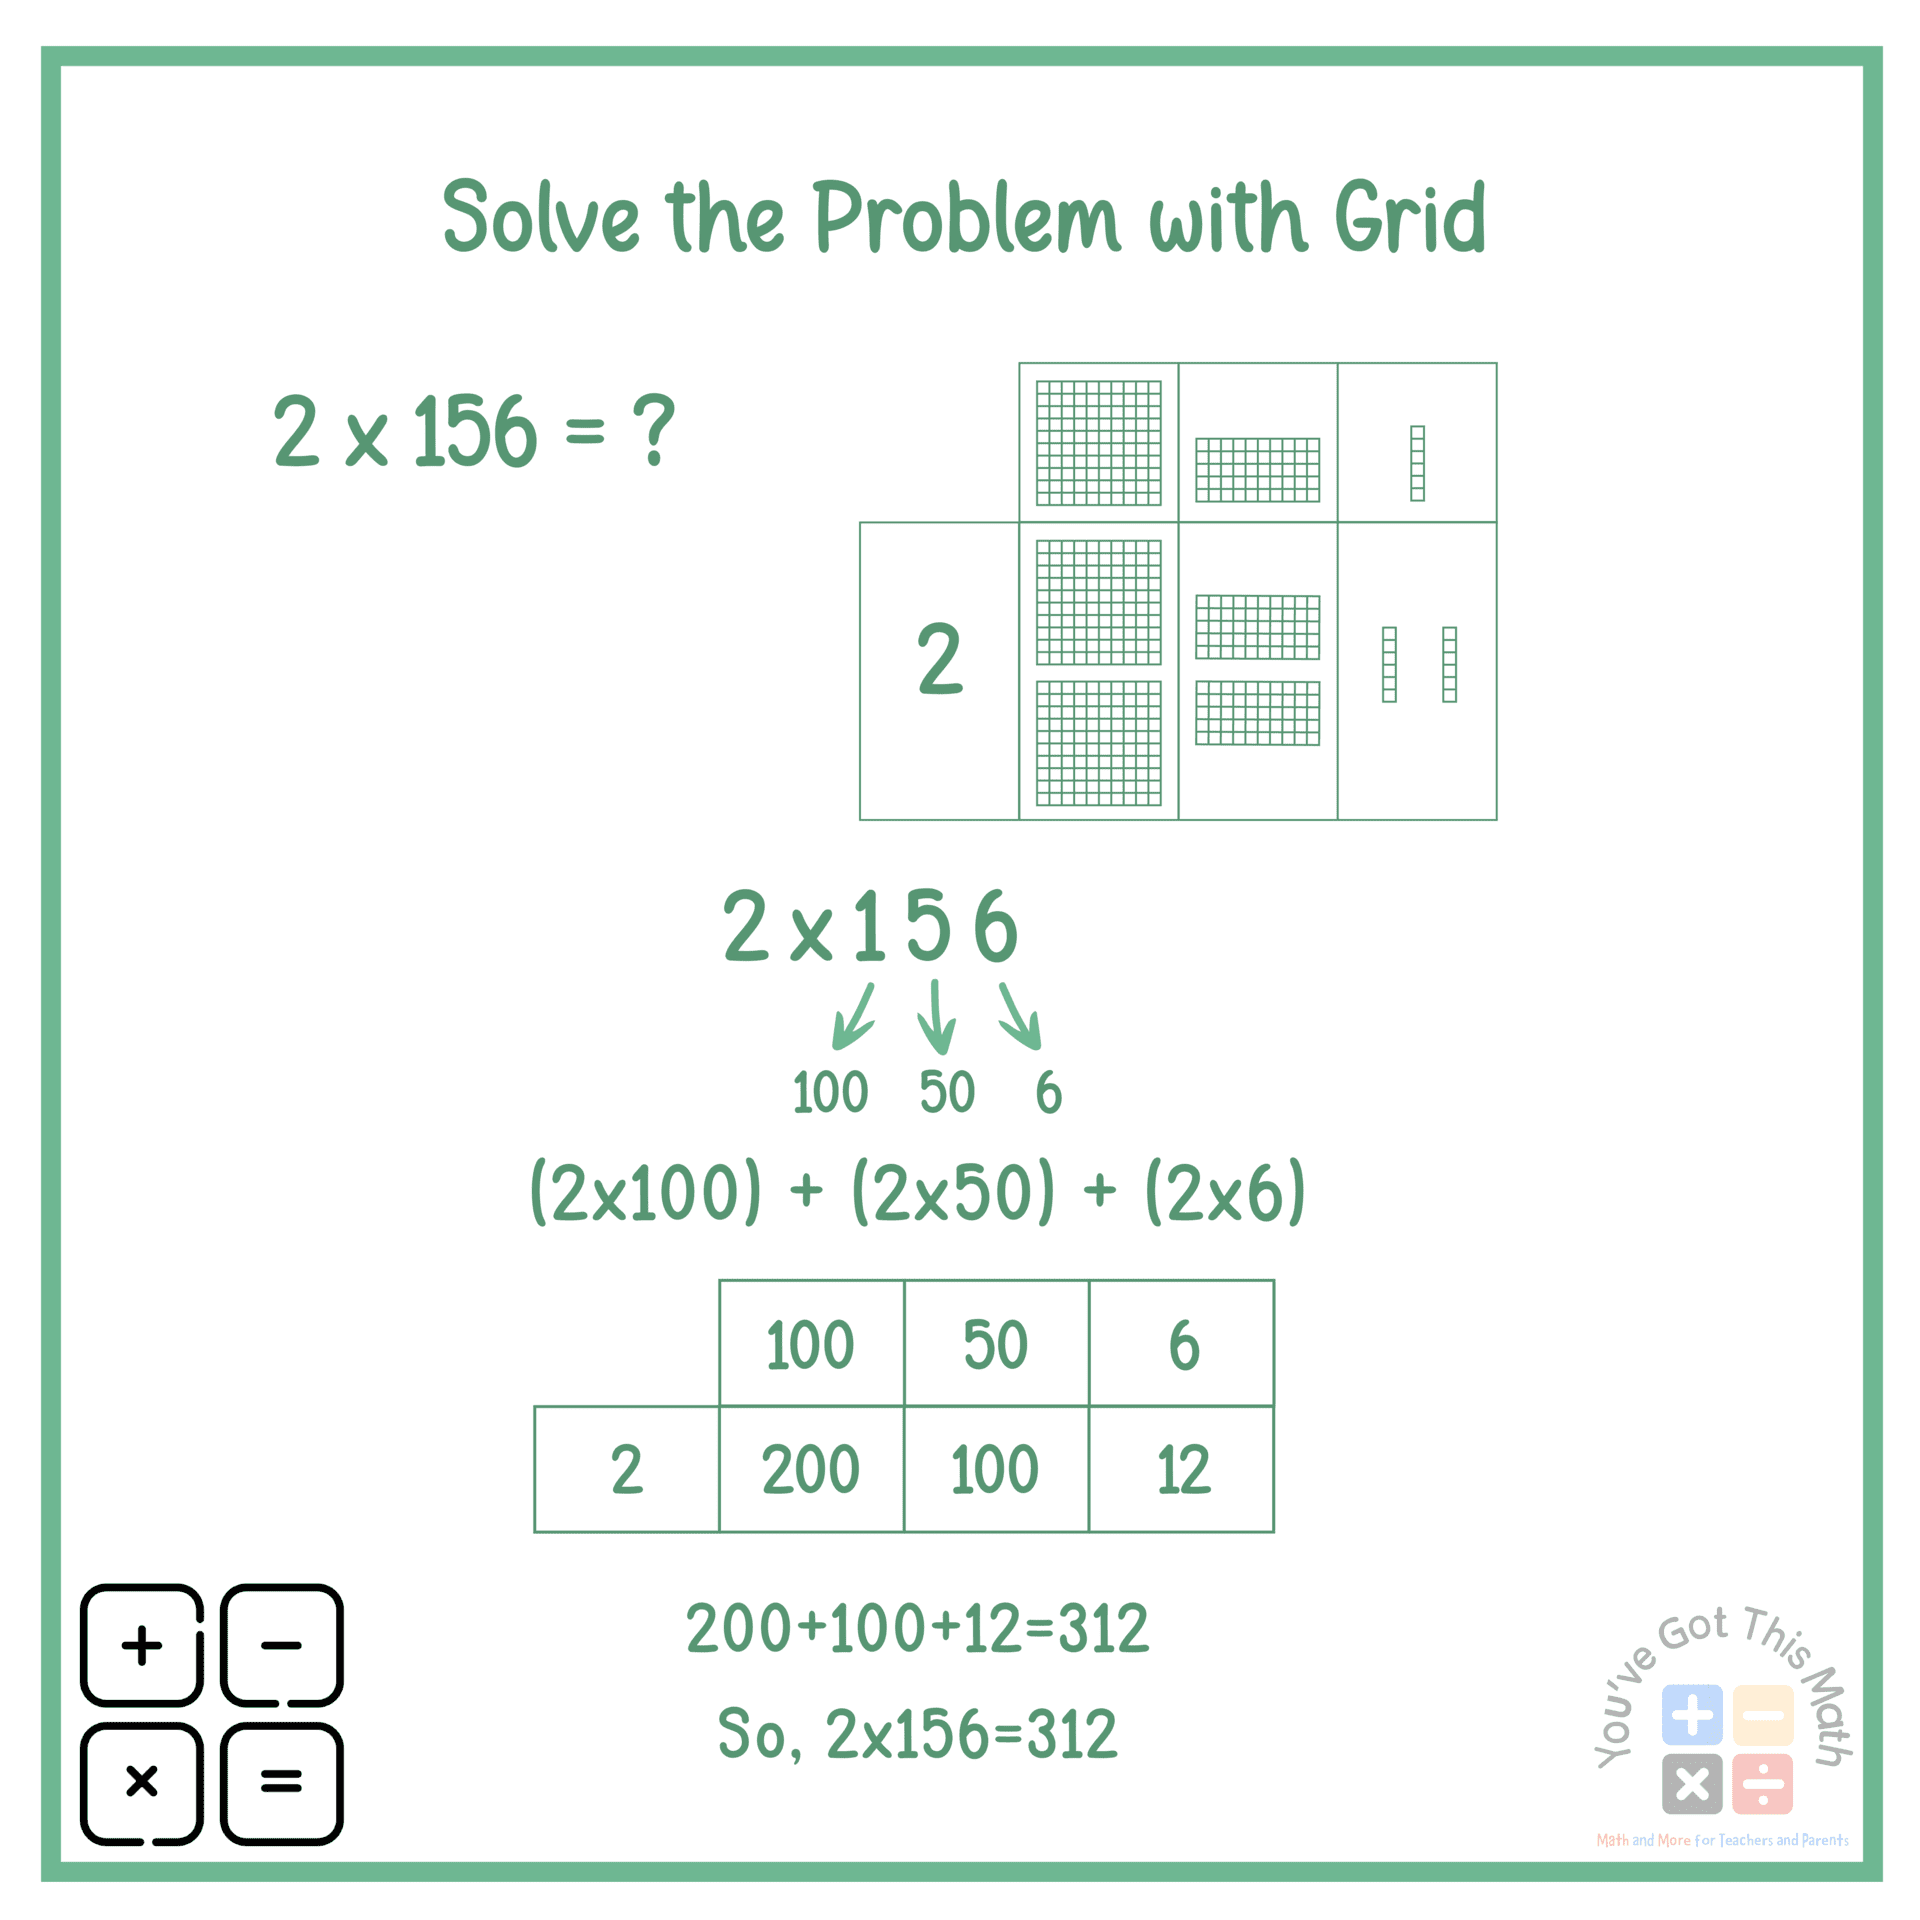 using grid to solve 3 Digit by 1 Digit Multiplication